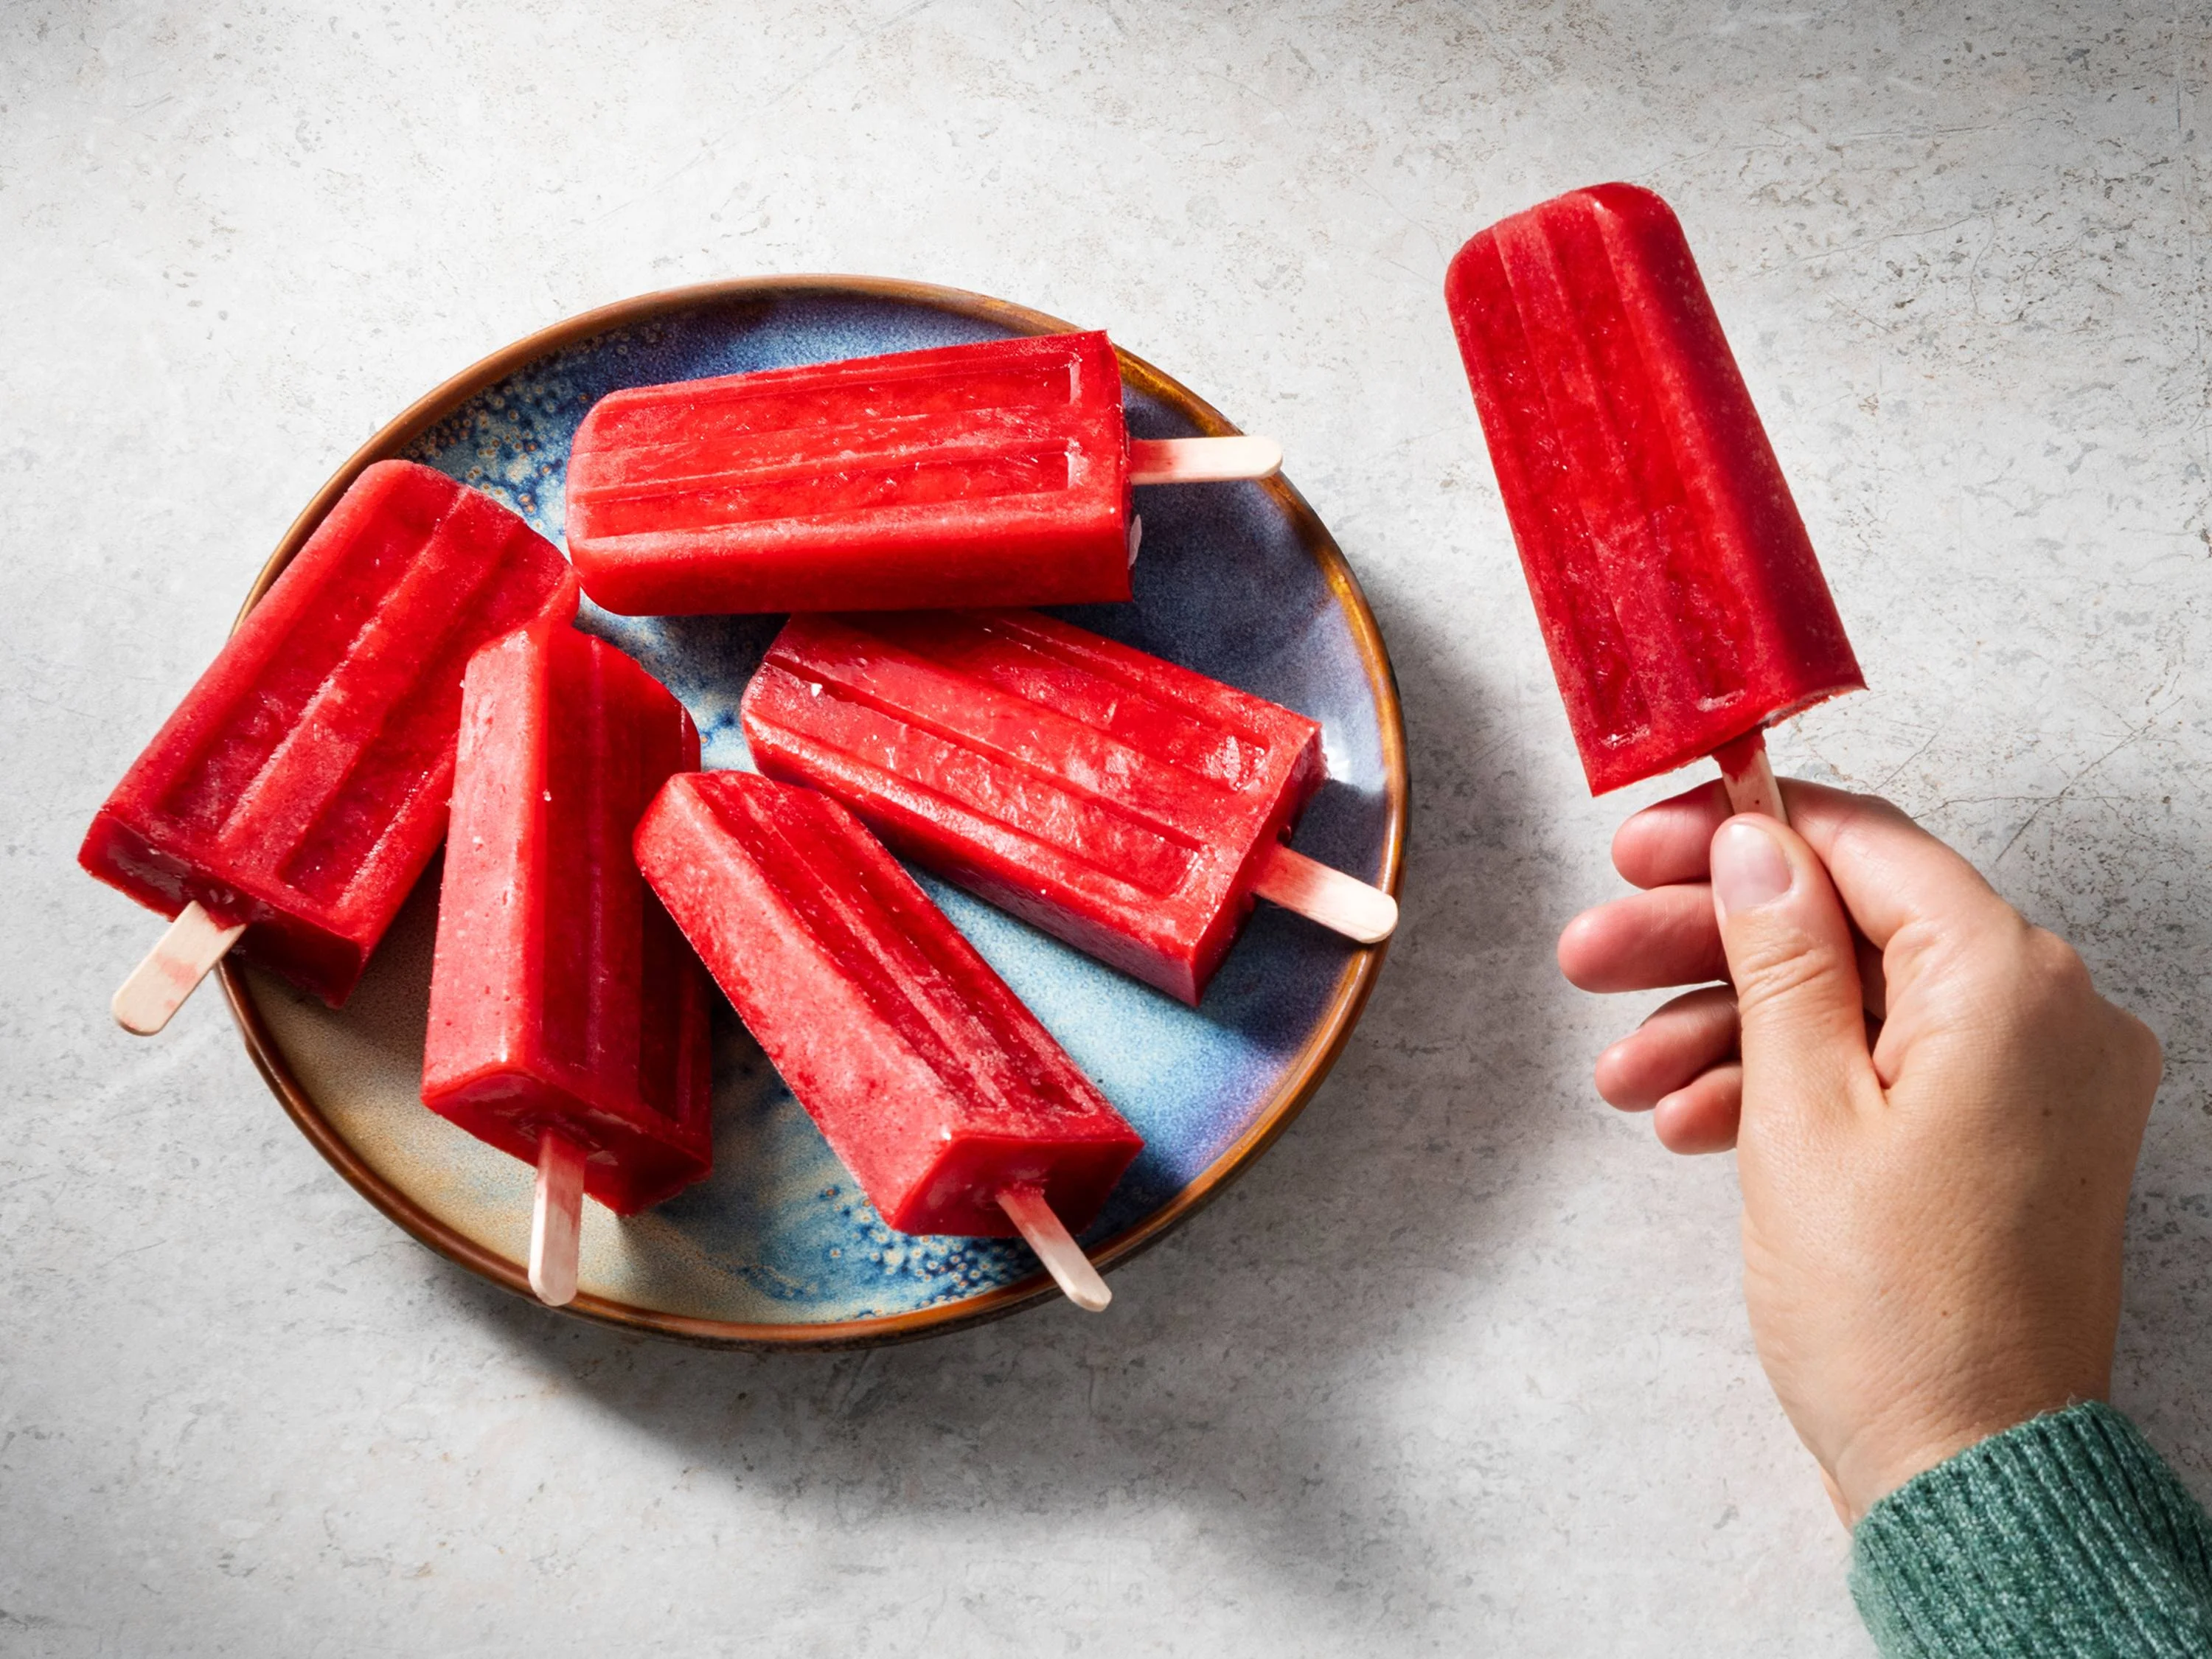 Popsicle Recipe 4 ways  Make Your Own Homemade Healthy Fruit Pops